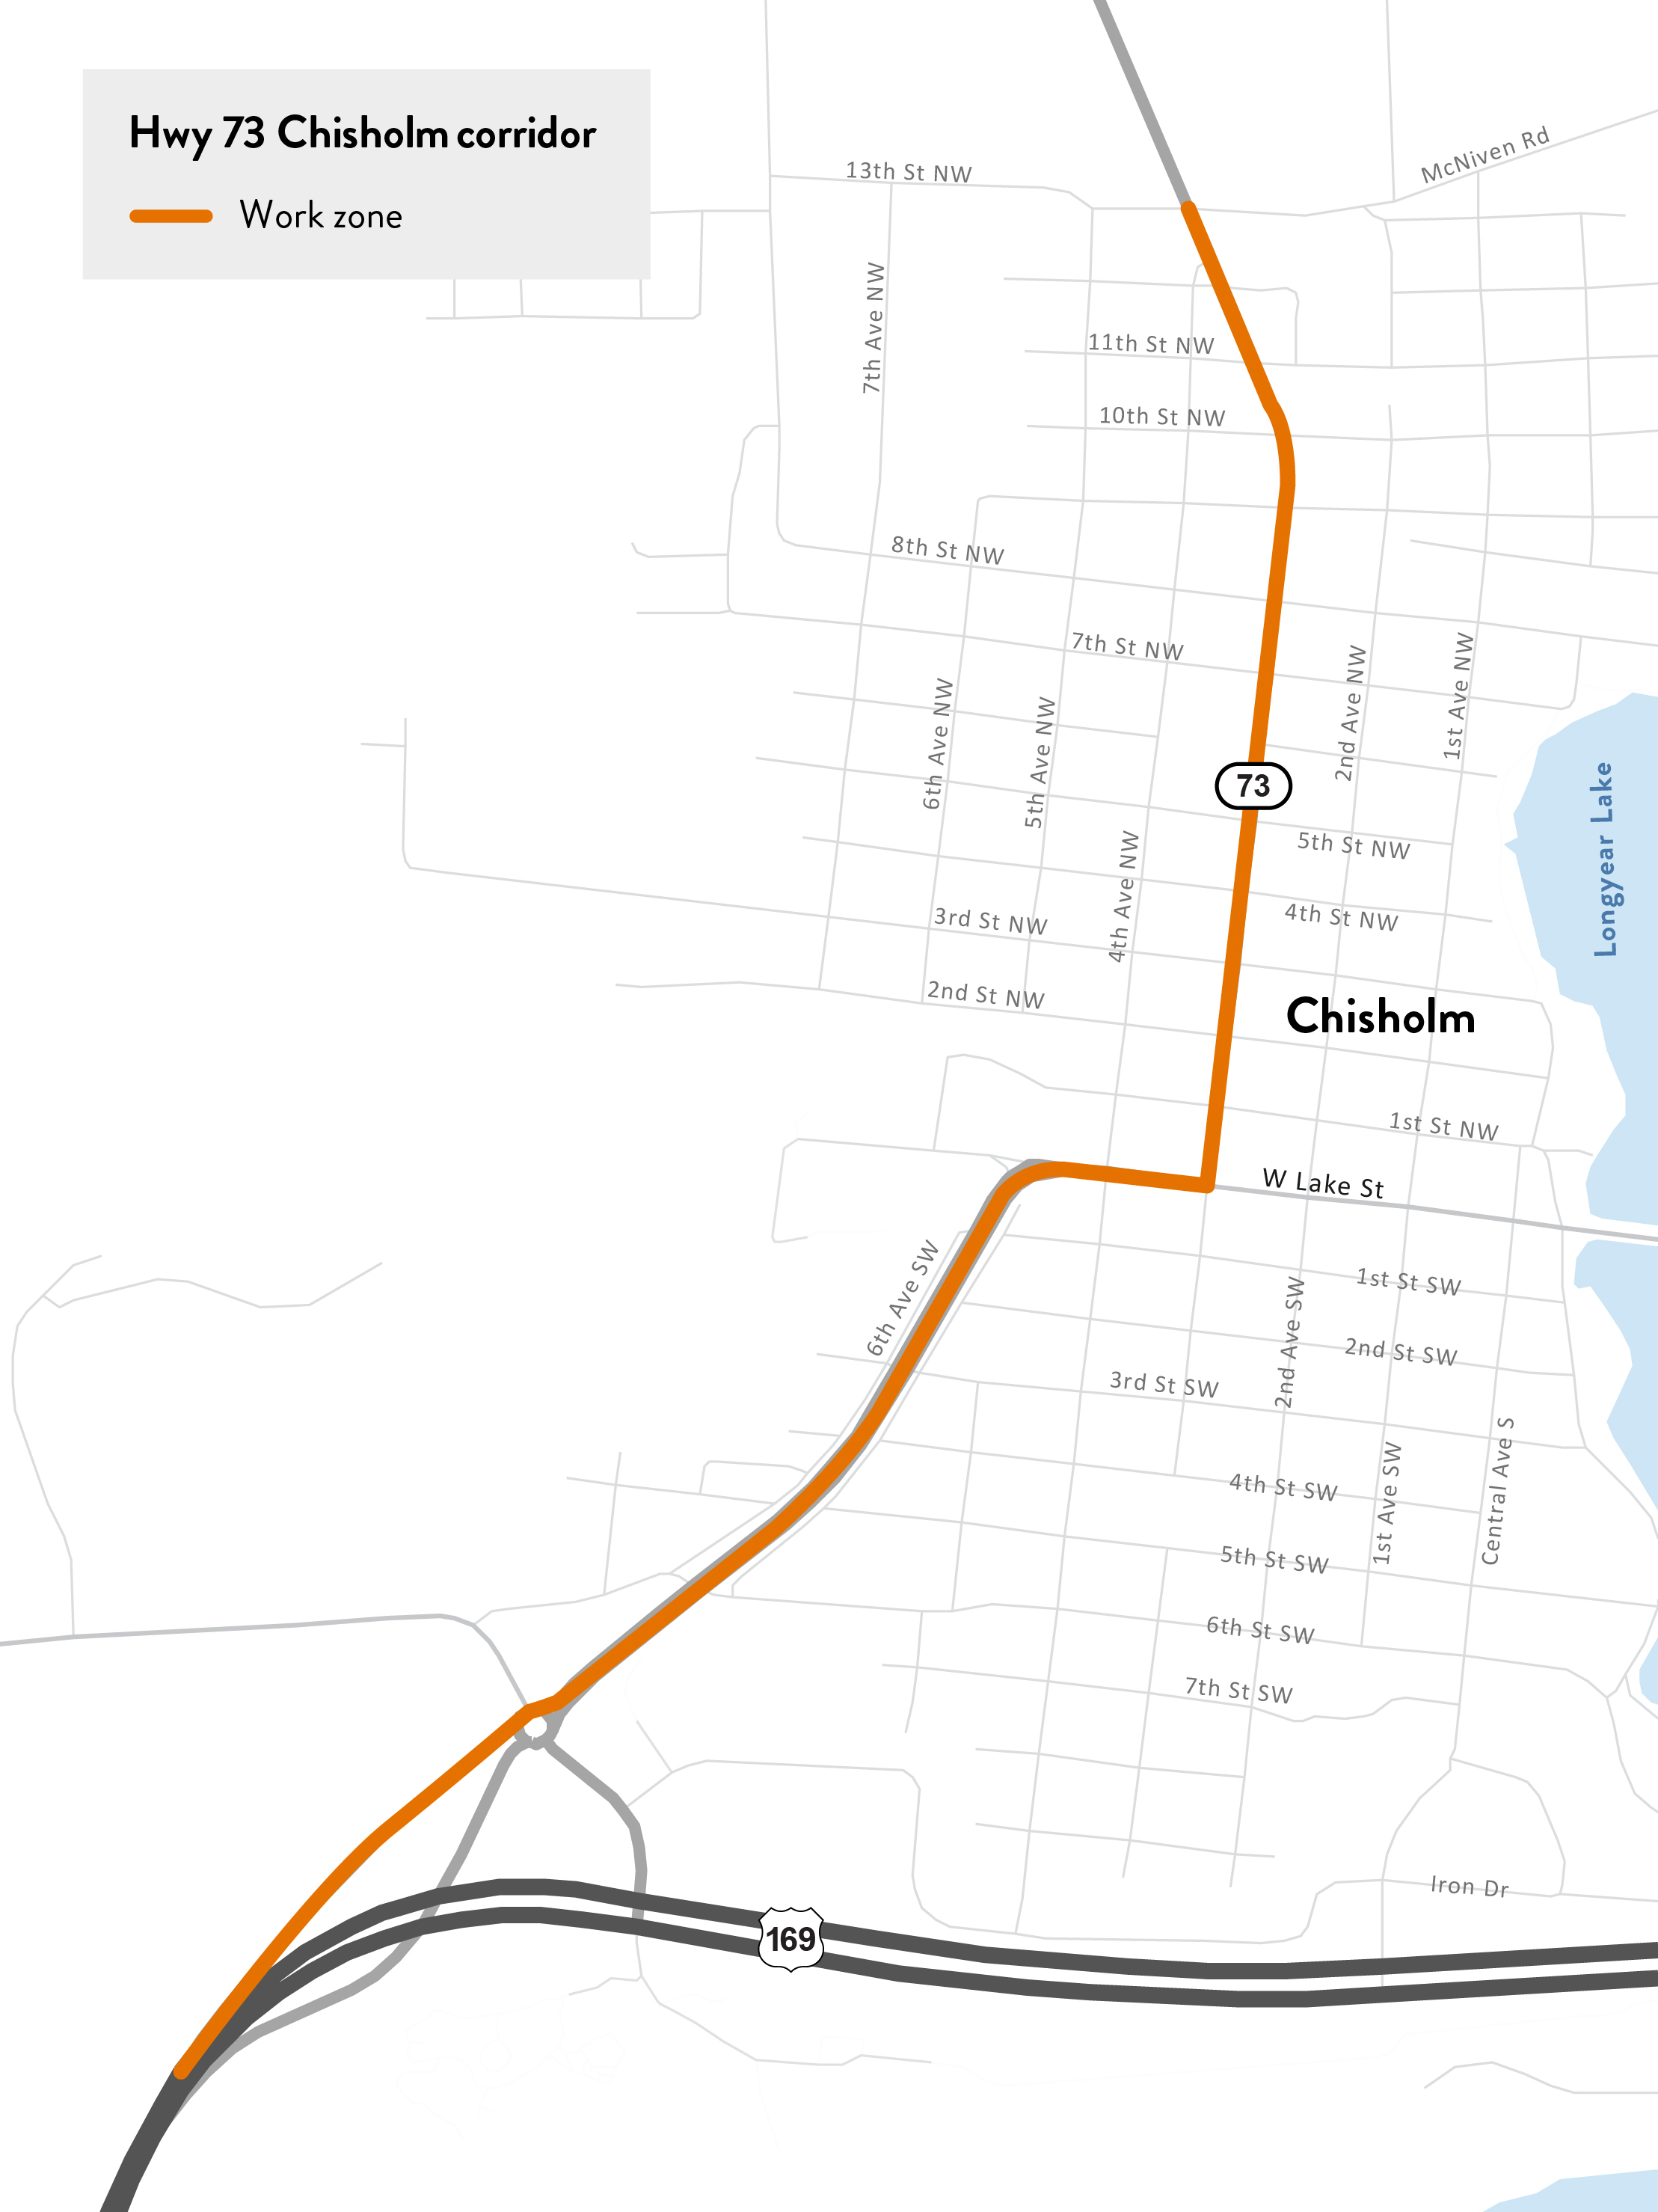 A rendering of the Hwy 73 Chisholm project.